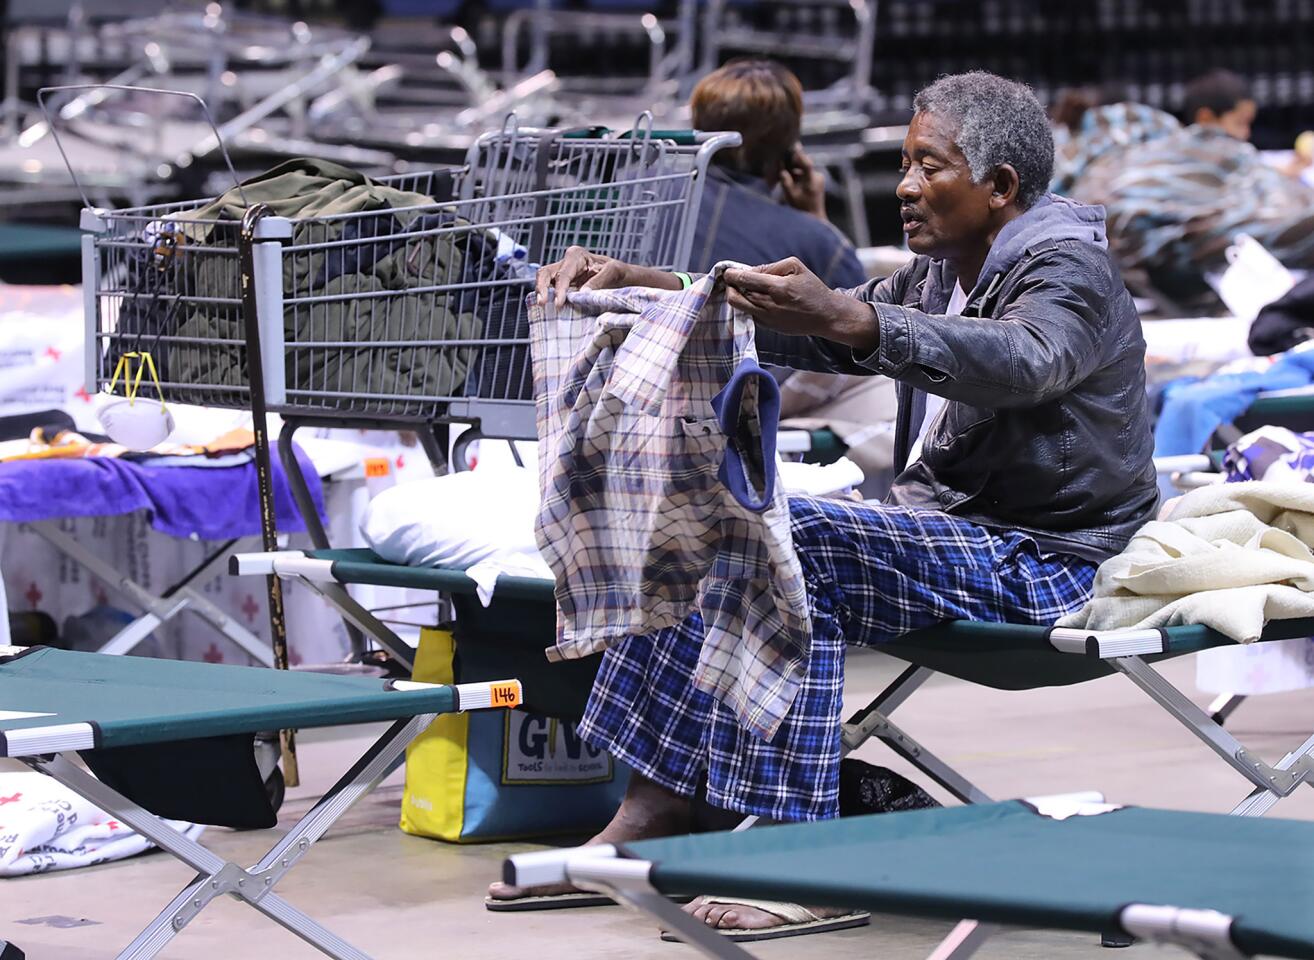 An elderly man drys out his clothes preparing to bed down for the night at the Red Cross shelter in the Albany Civic Center to ride out Hurricane Irma on Sept. 10, 2017, in Albany, Ga.